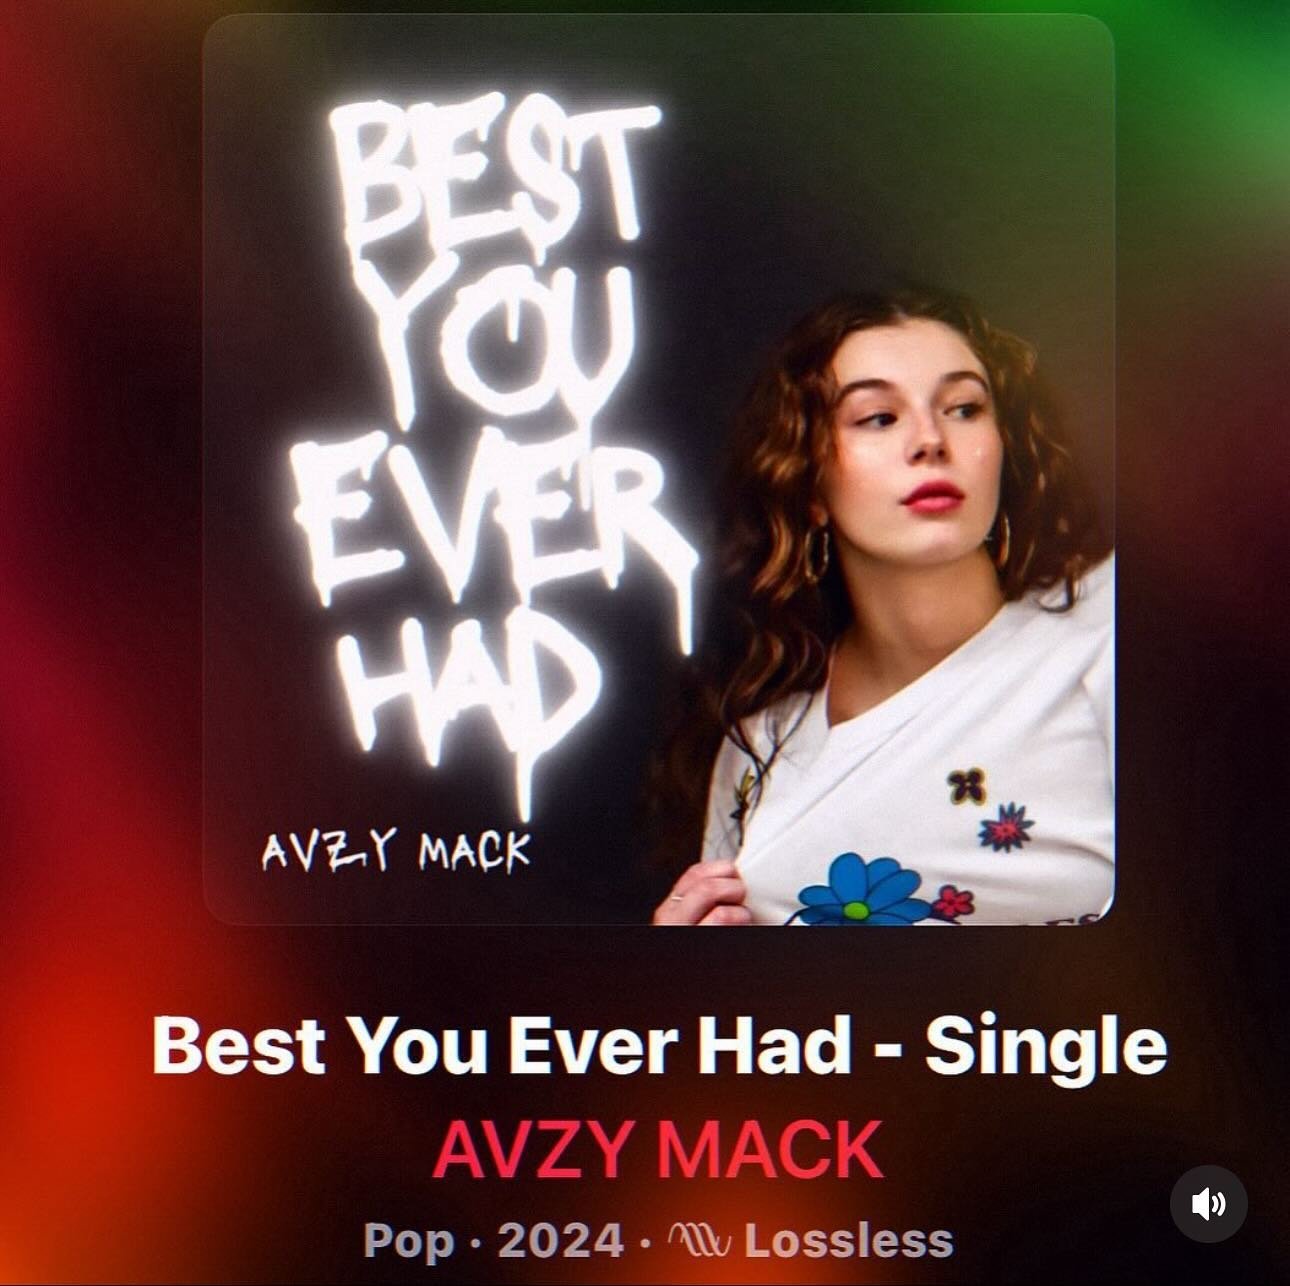 PCG Alum @avzy_mack it&rsquo;s official..&rdquo;BEST YOU EVER HAD&rdquo; is out now!! on all platforms!! I hope everyone loves it! add to your playlists @ #bestyoueverhad